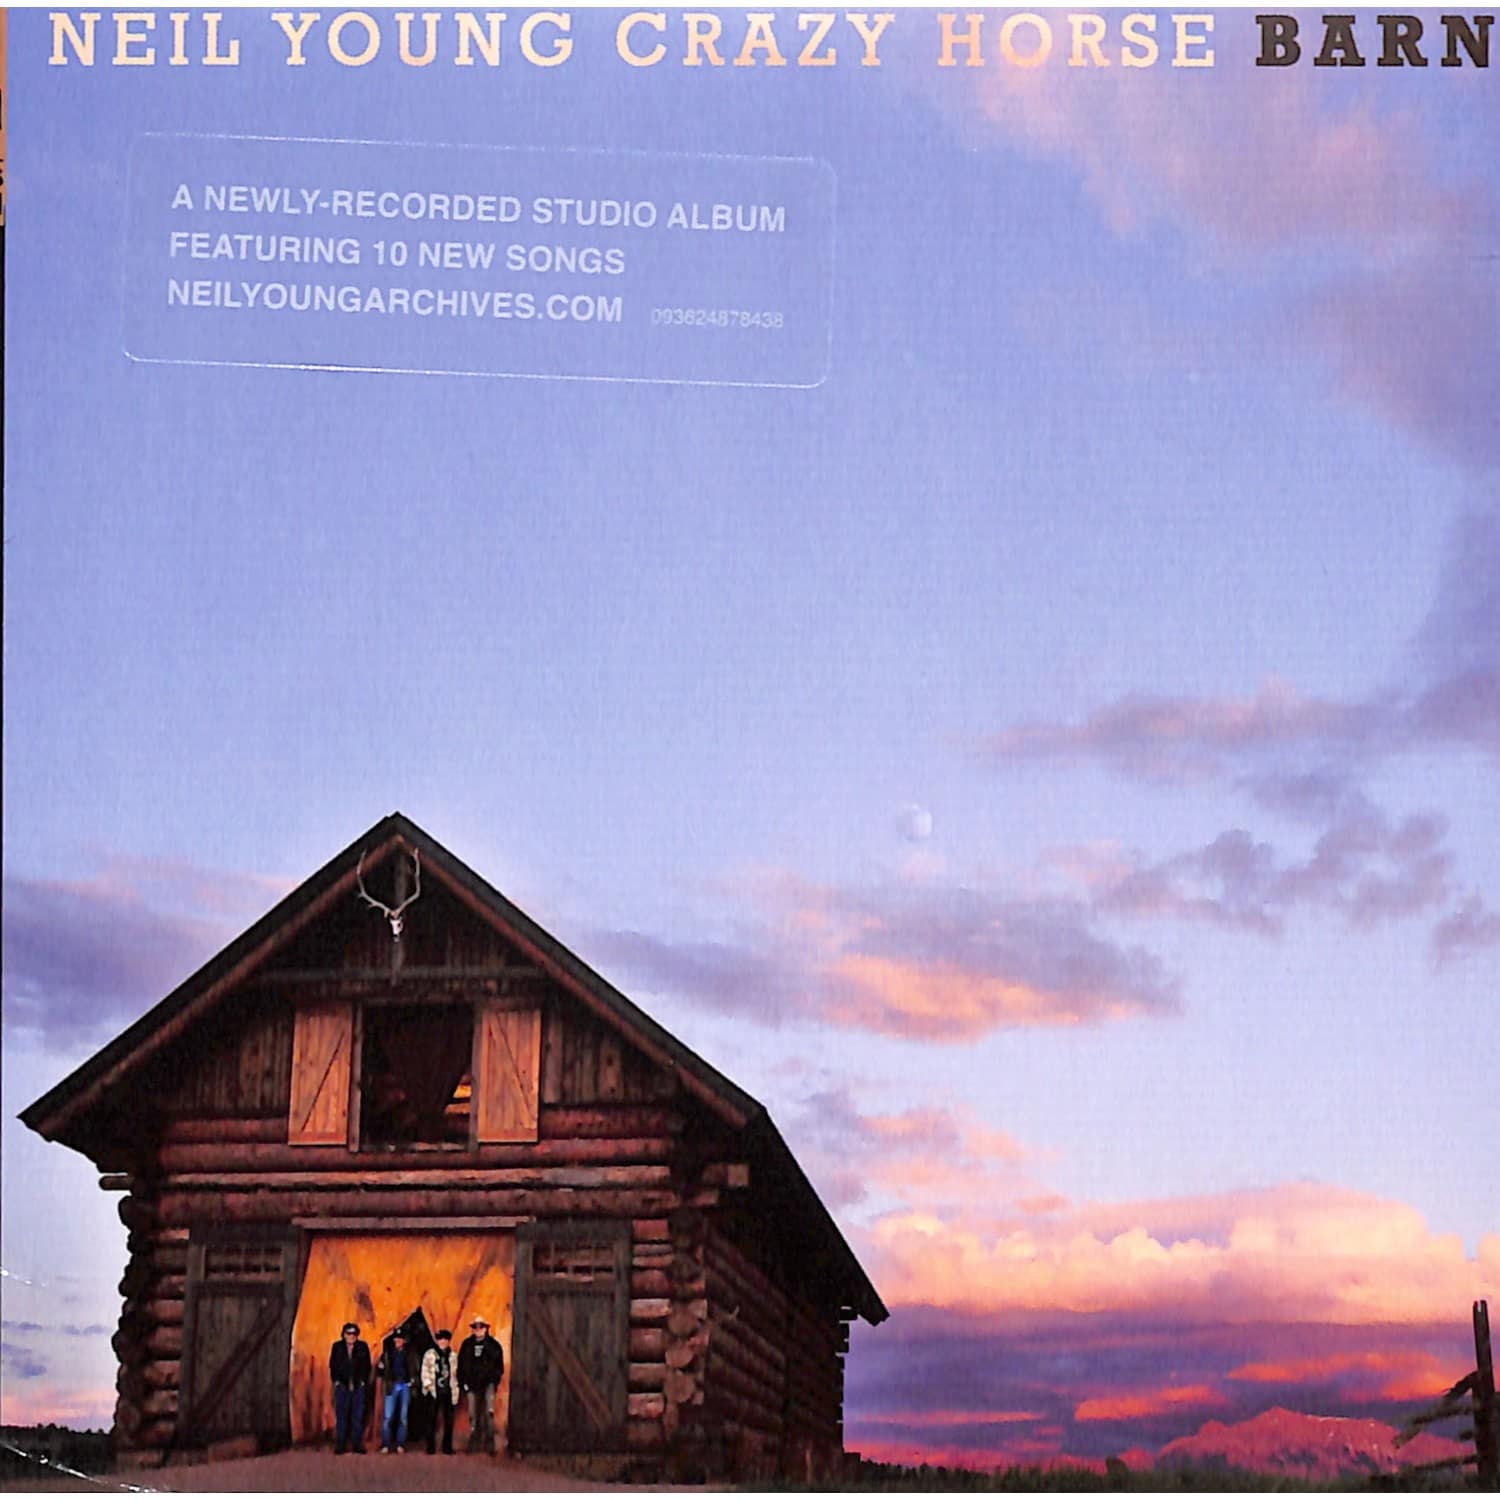 Neil Young & Crazy Horse - BARN 